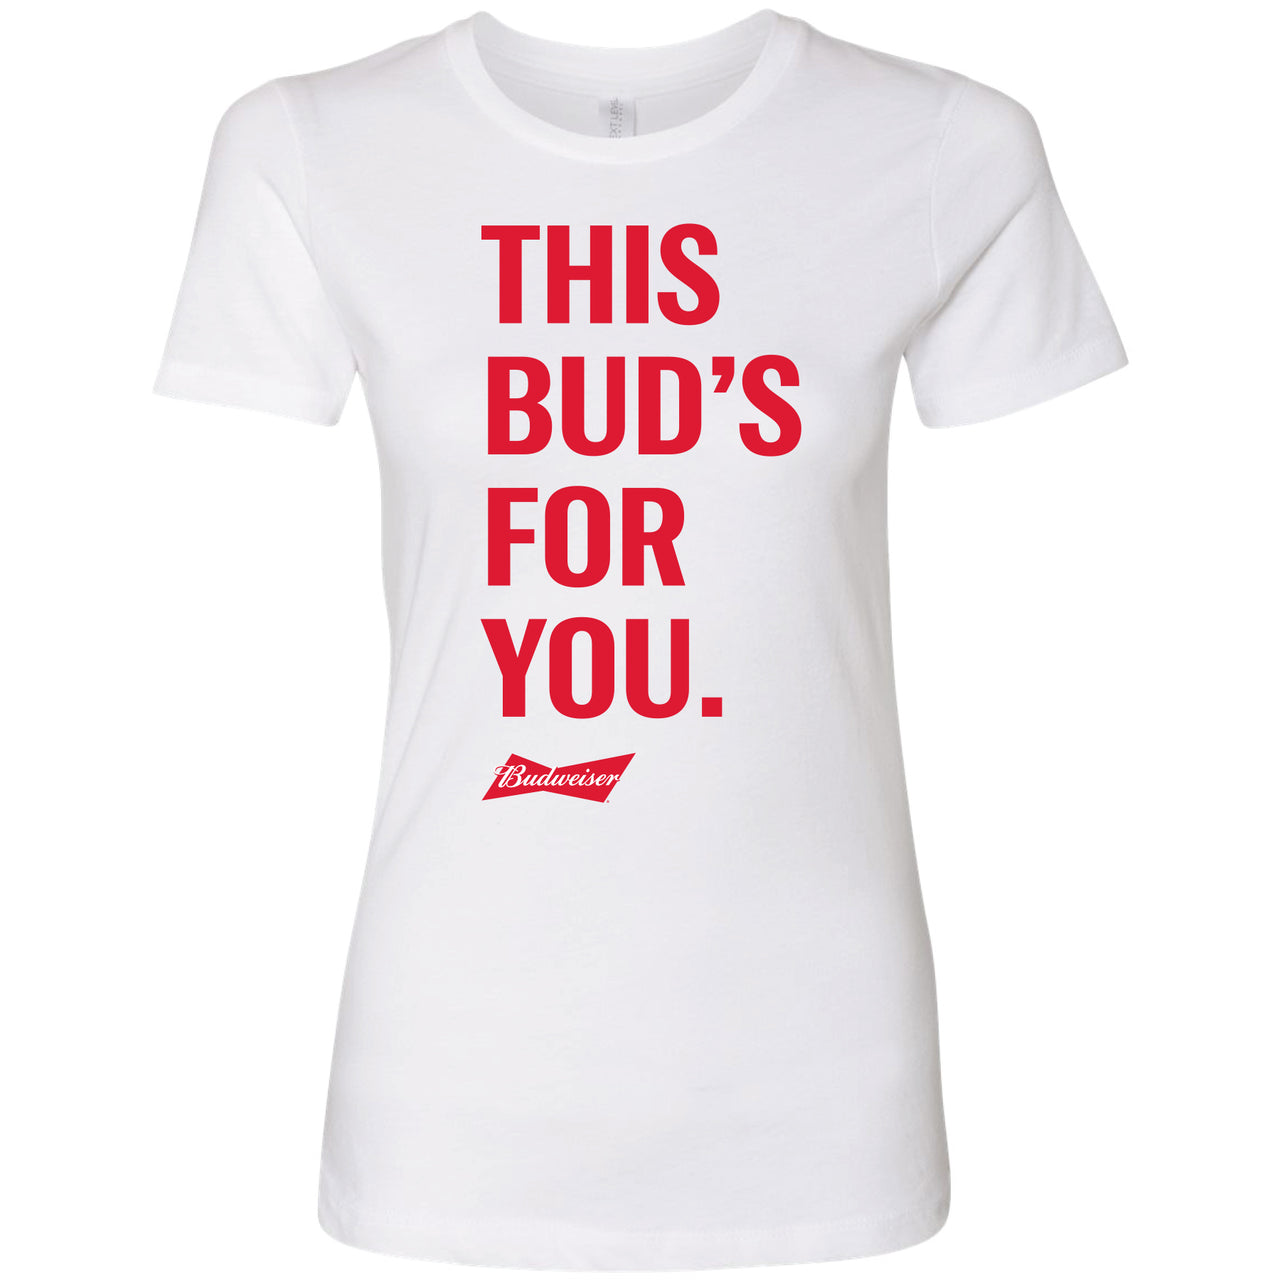 Budweiser This Bud's For You Ladies T-Shirt